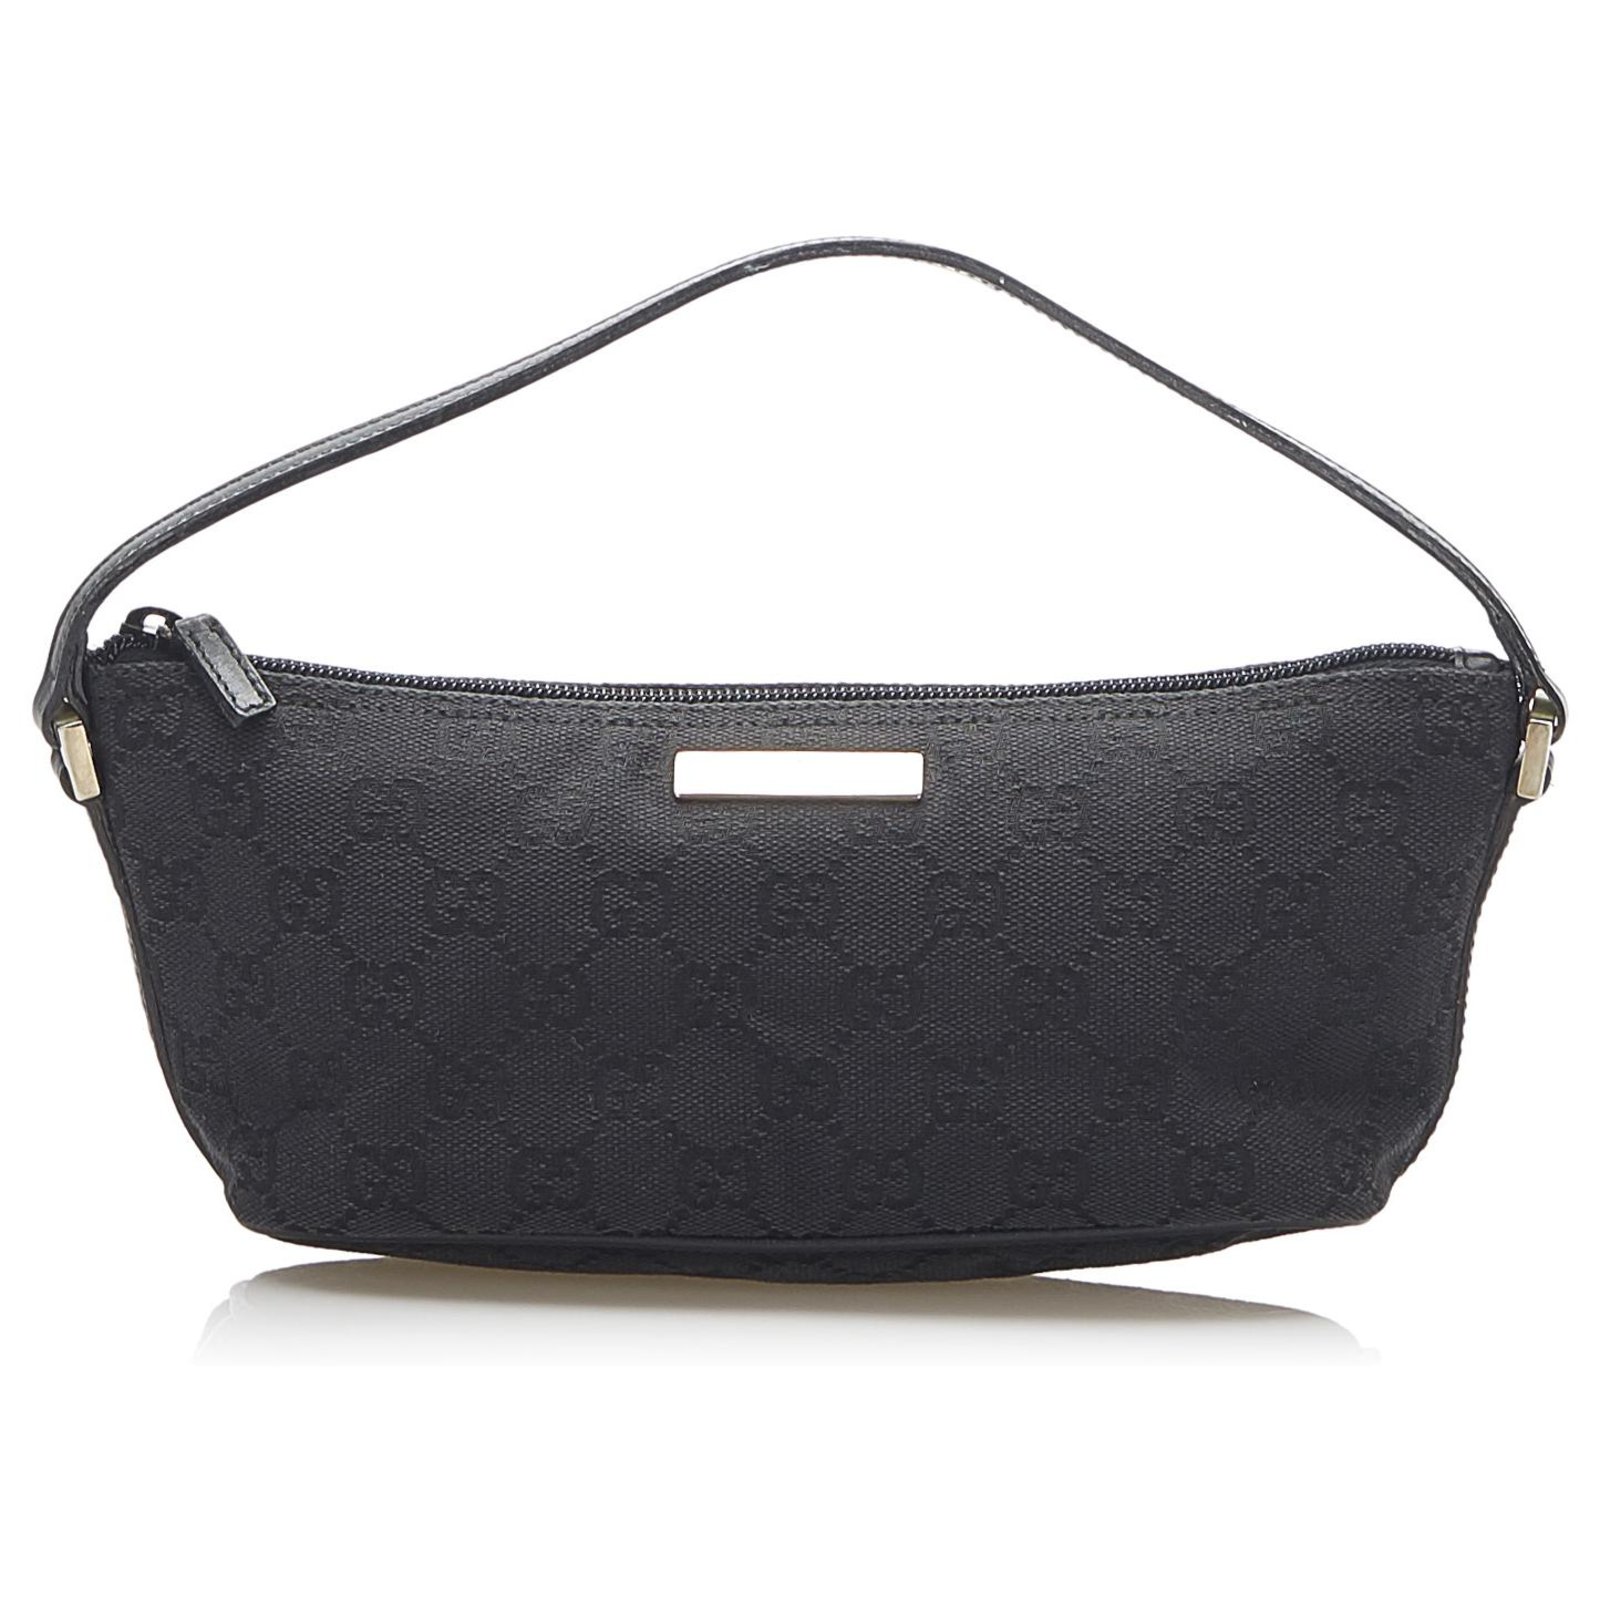 Gucci Black GG Canvas and Leather Baguette Bag